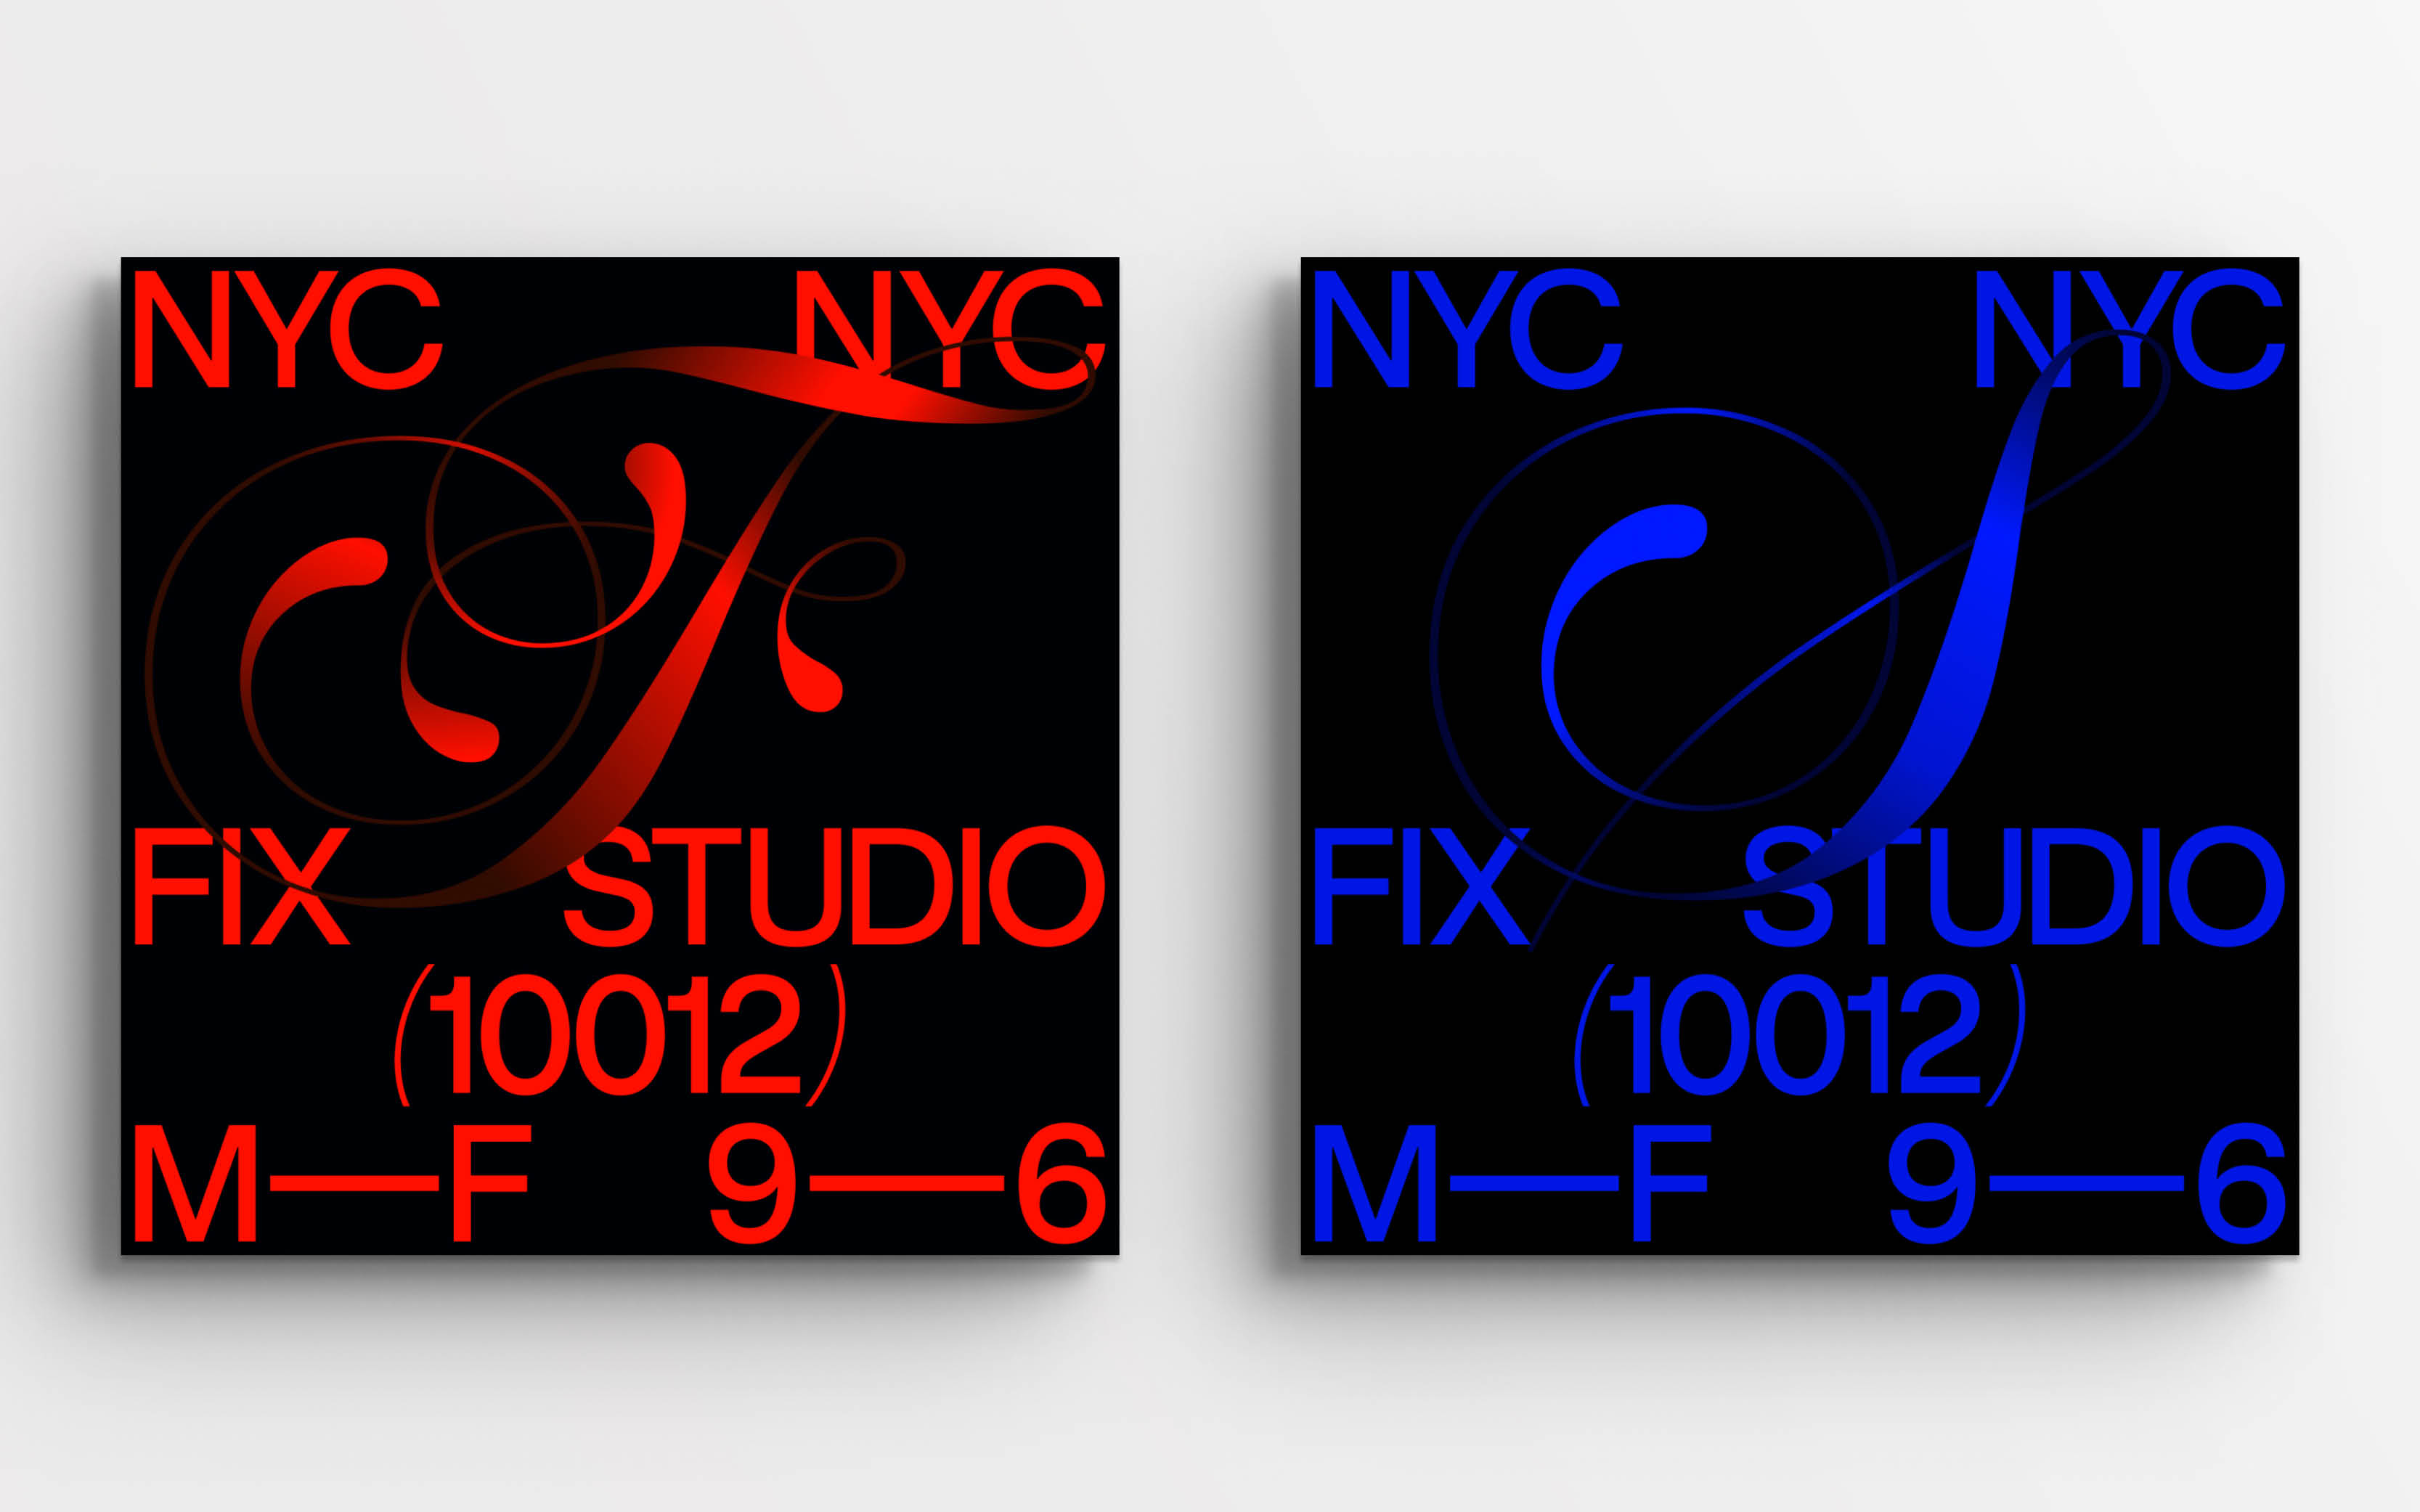 Fix Studio corporate identity using the corporate font : initials, wordmark and full logos are exploited.